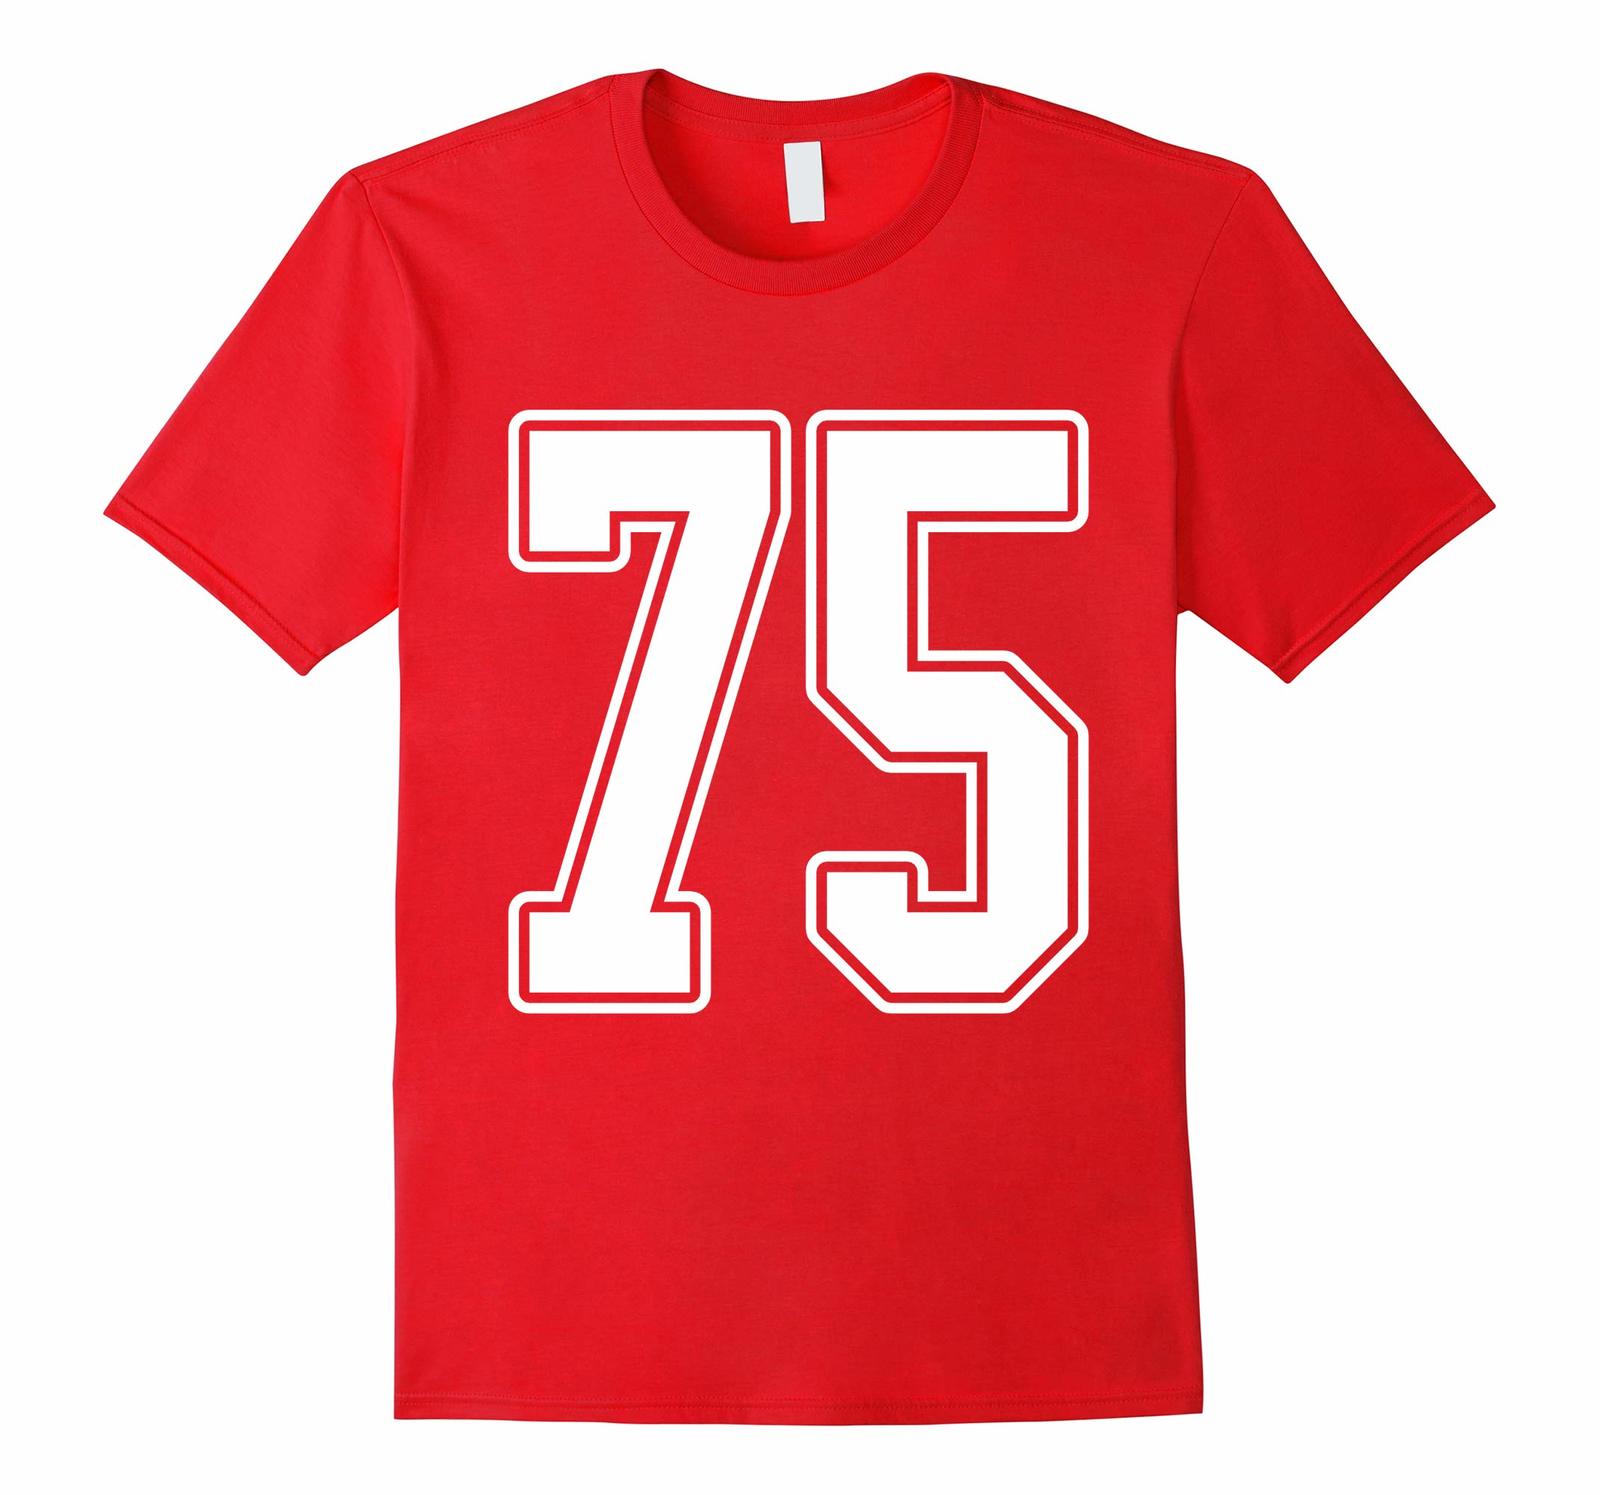 New Tee - #75 White Outline Number 75 Sports Fan Jersey Style T-Tee Men ...